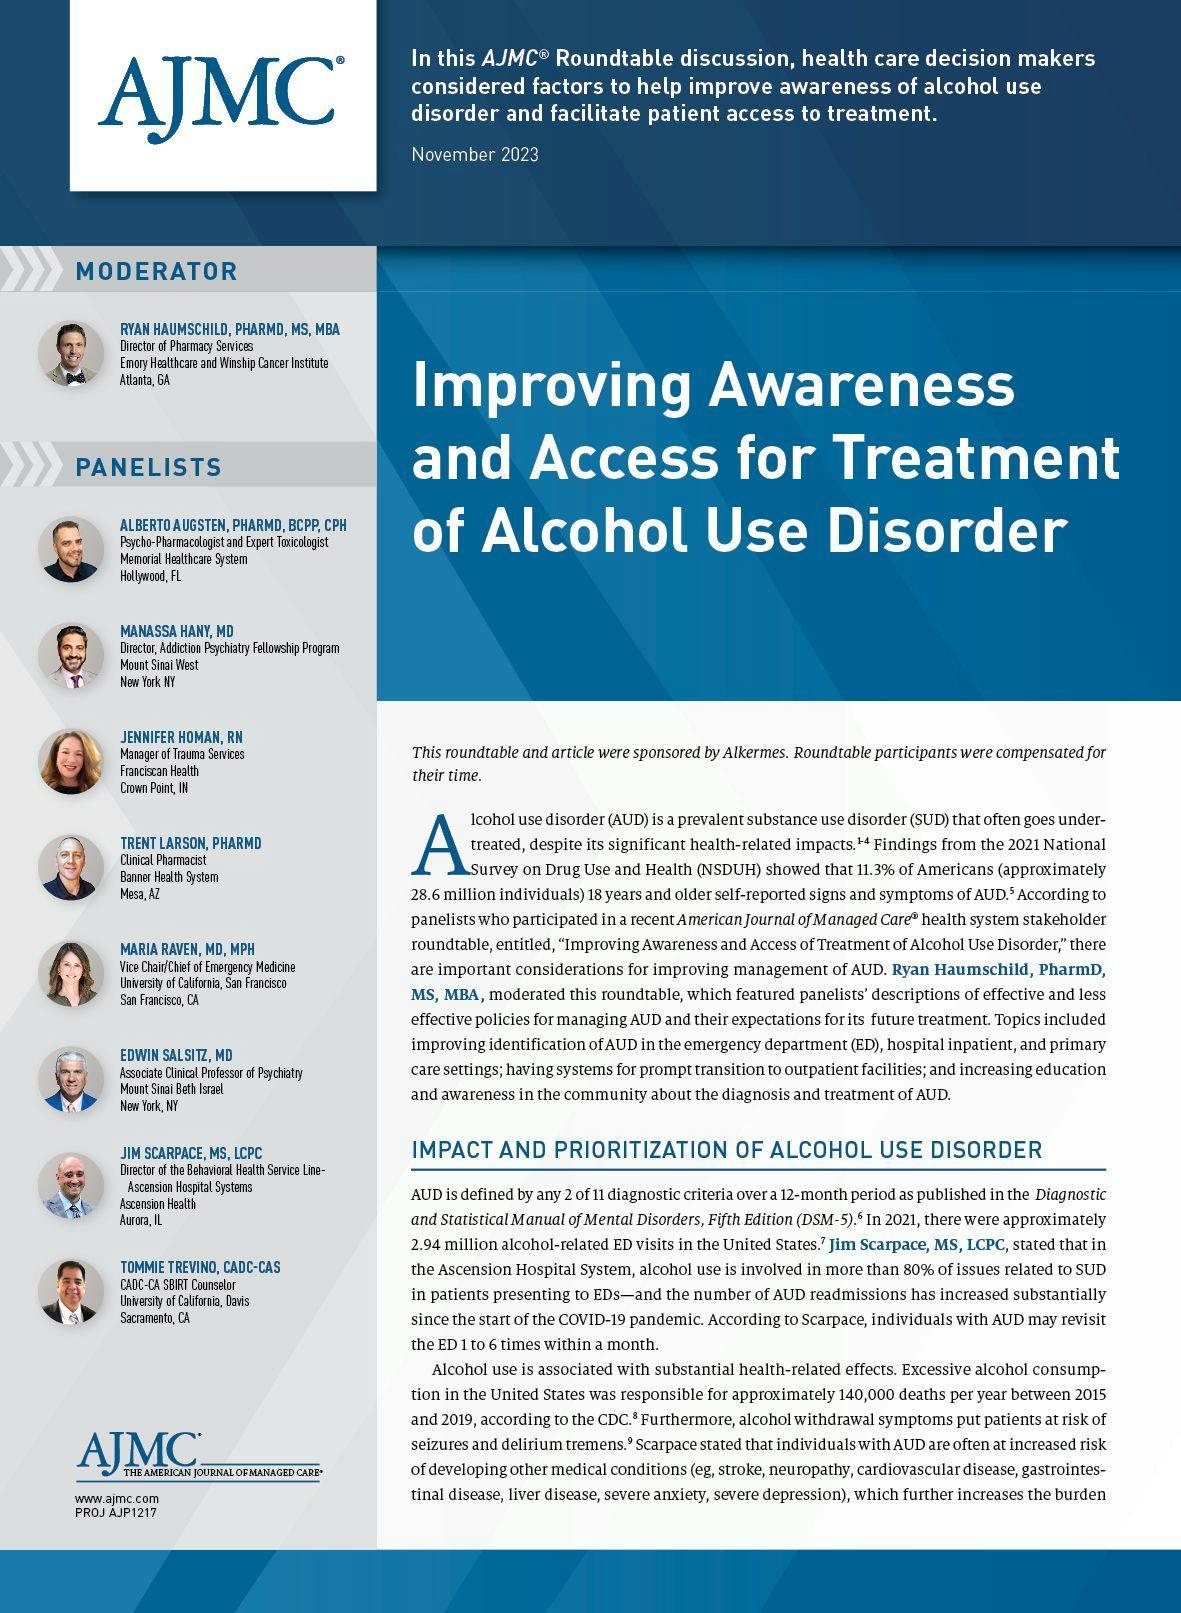 Improving Awareness and Access for Treatment of Alcohol Use Disorder